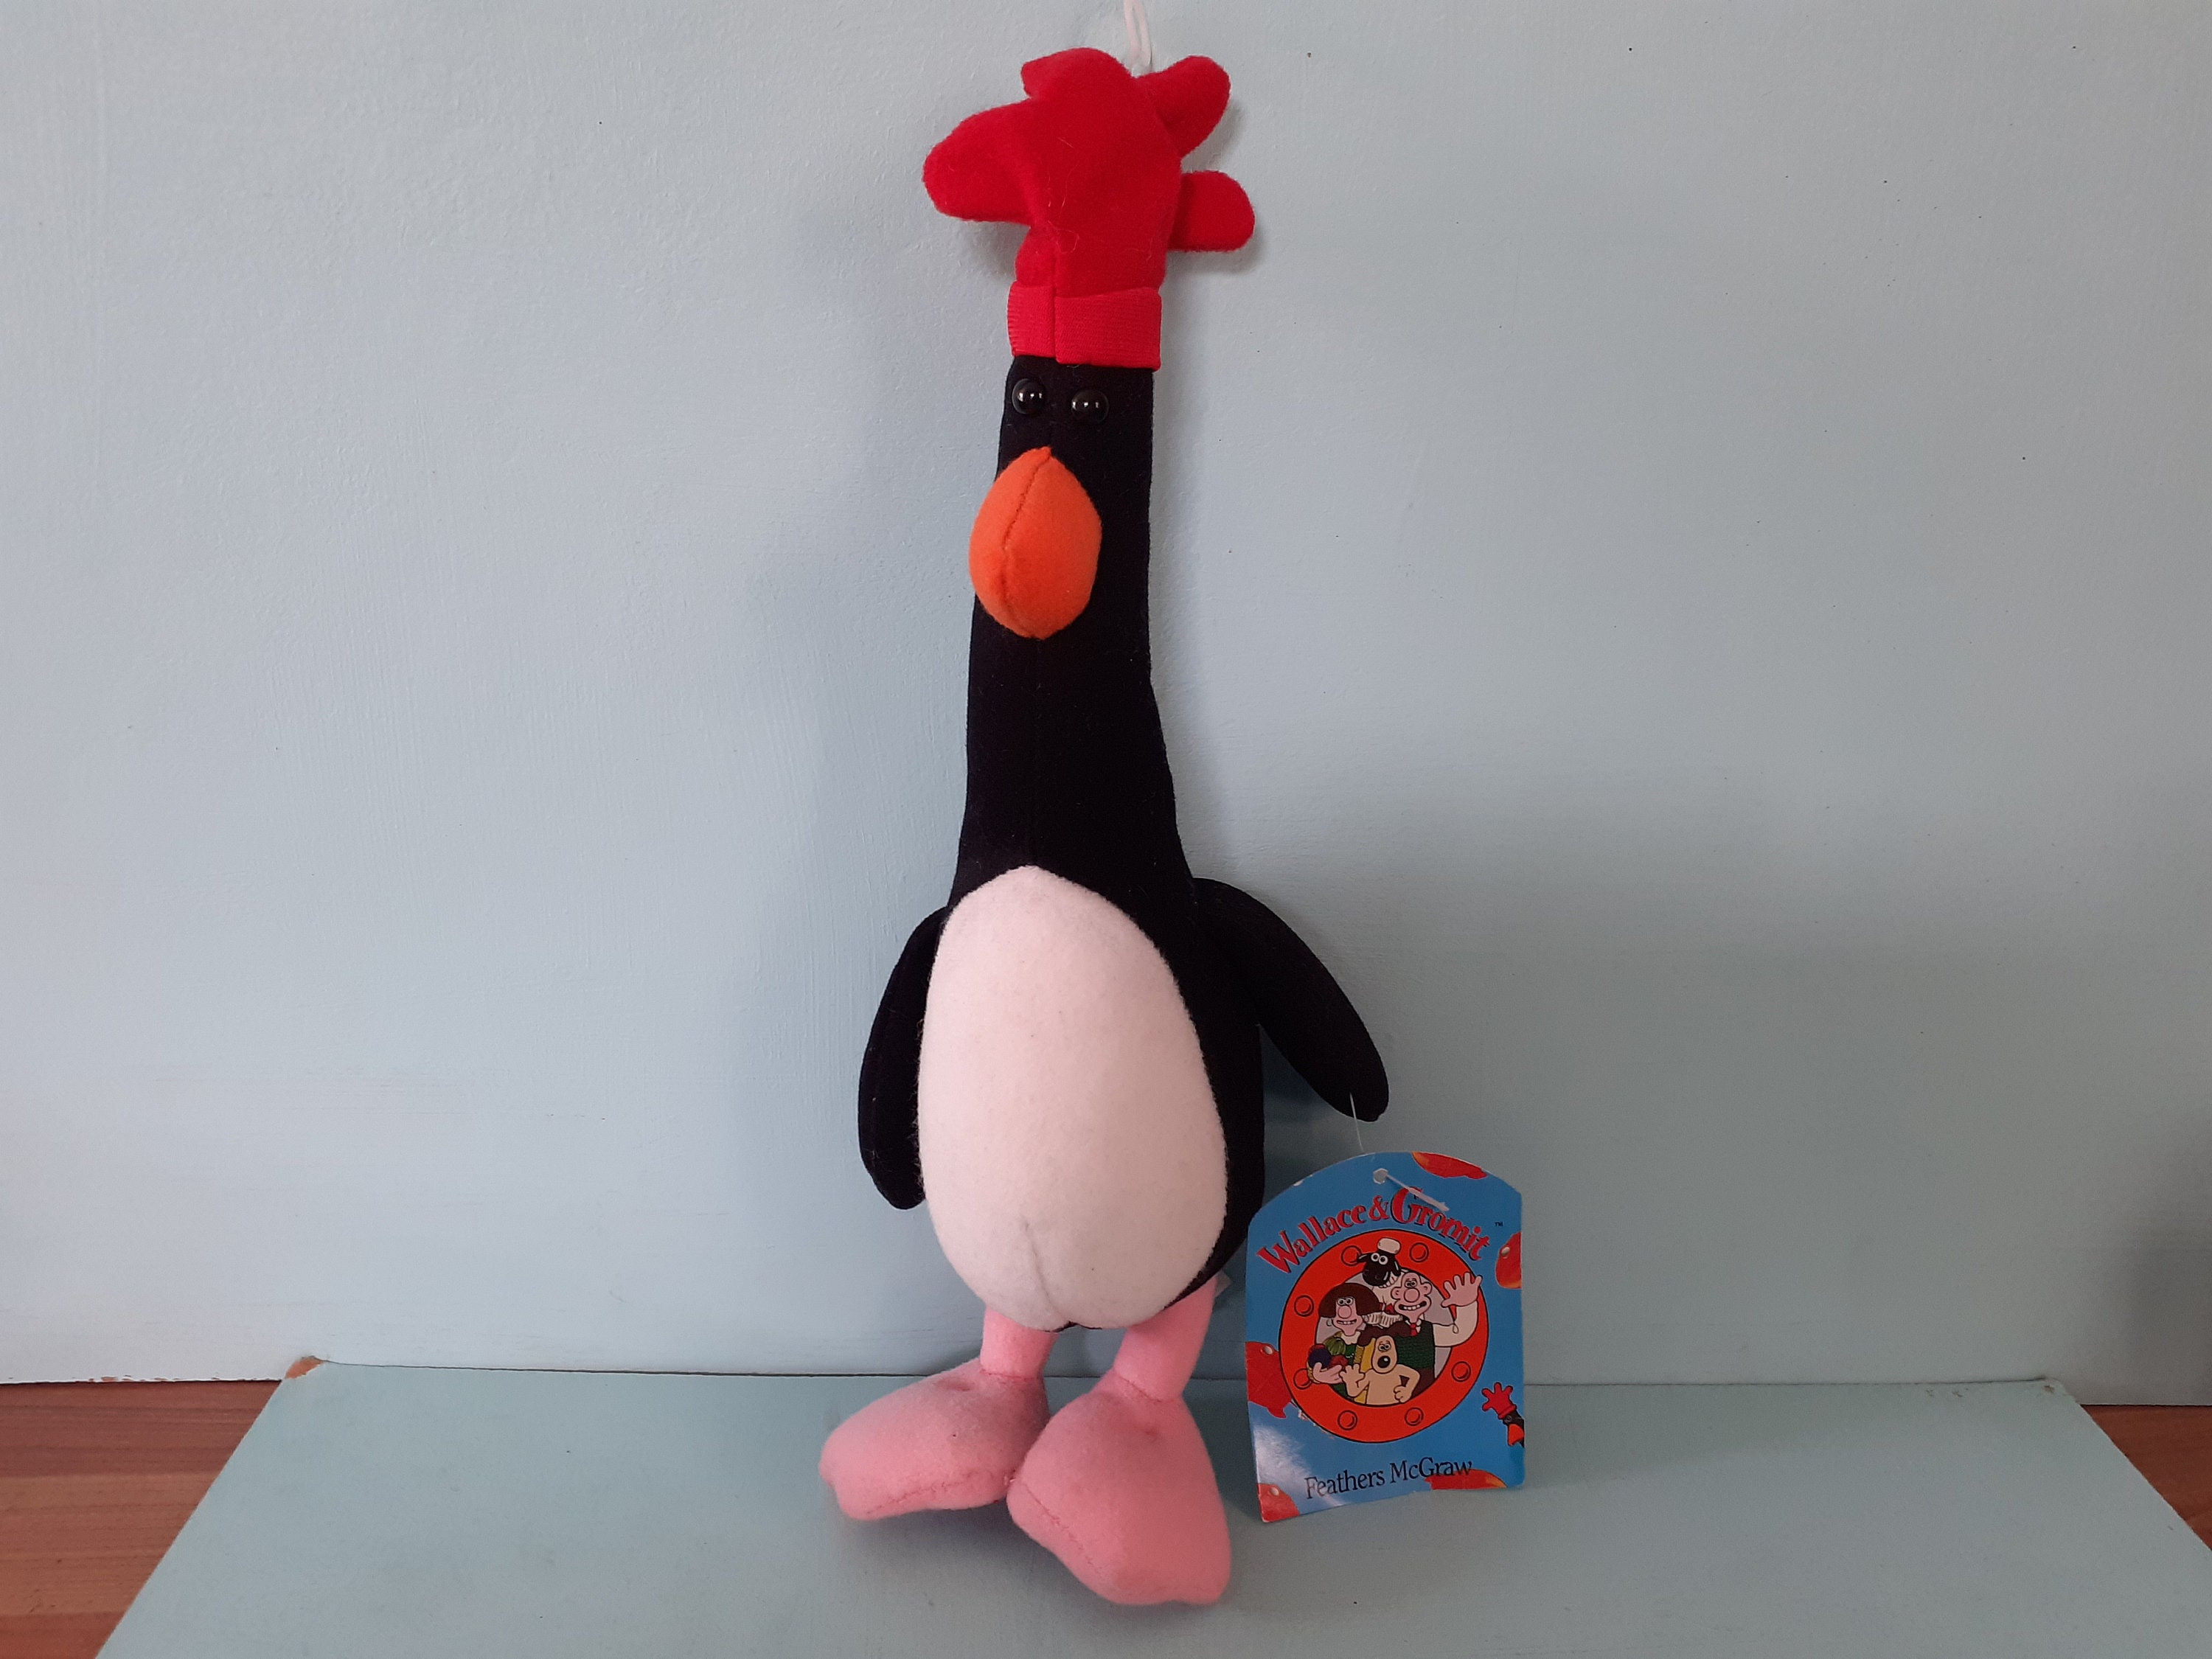 Wallace and Gromit - Feathers McGraw Ceramic Vase